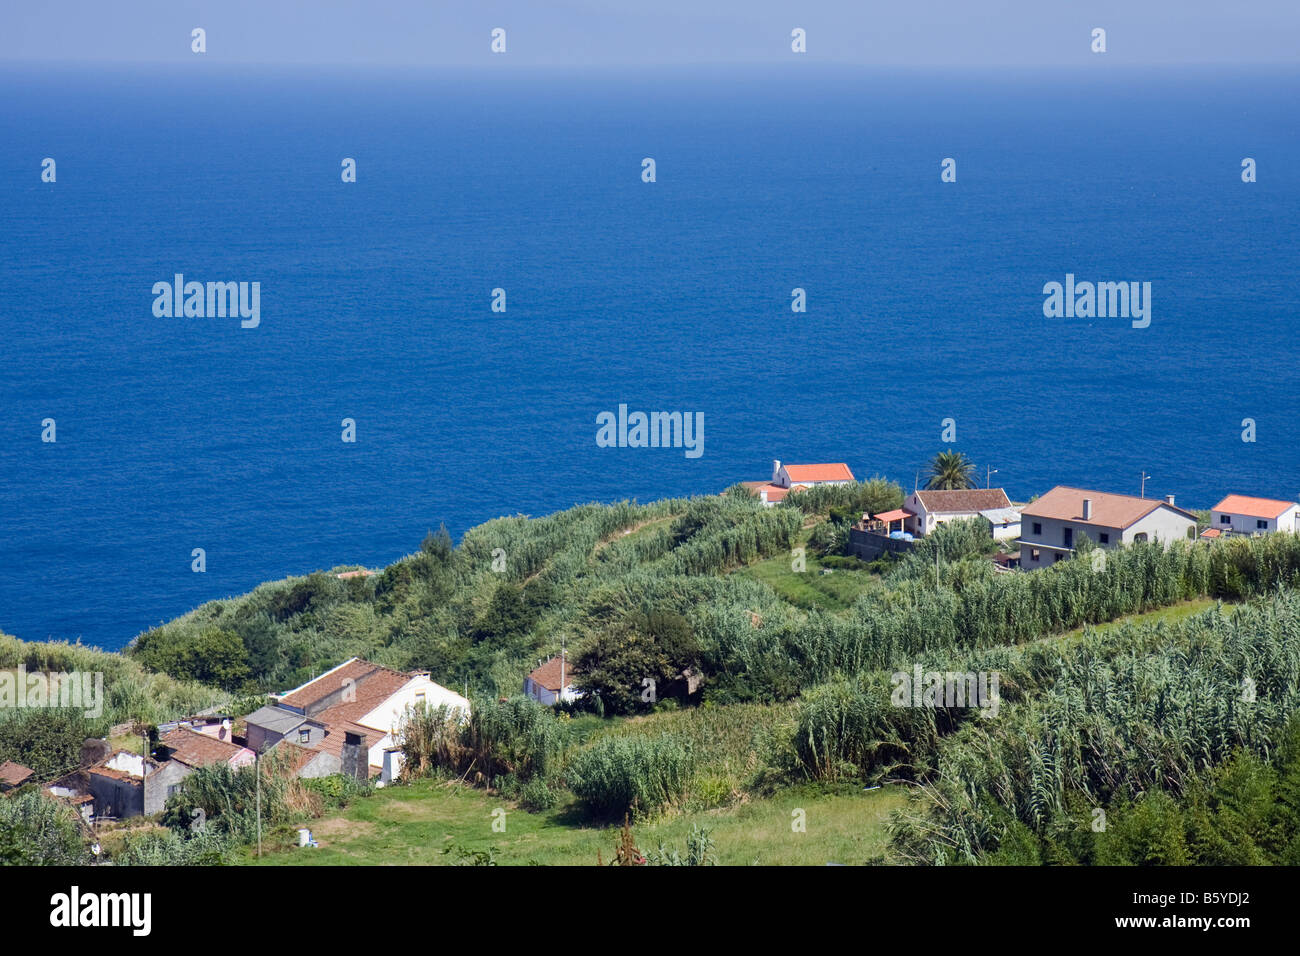 Houses by the sea in São Miguel, Azores, Portugal Stock Photo